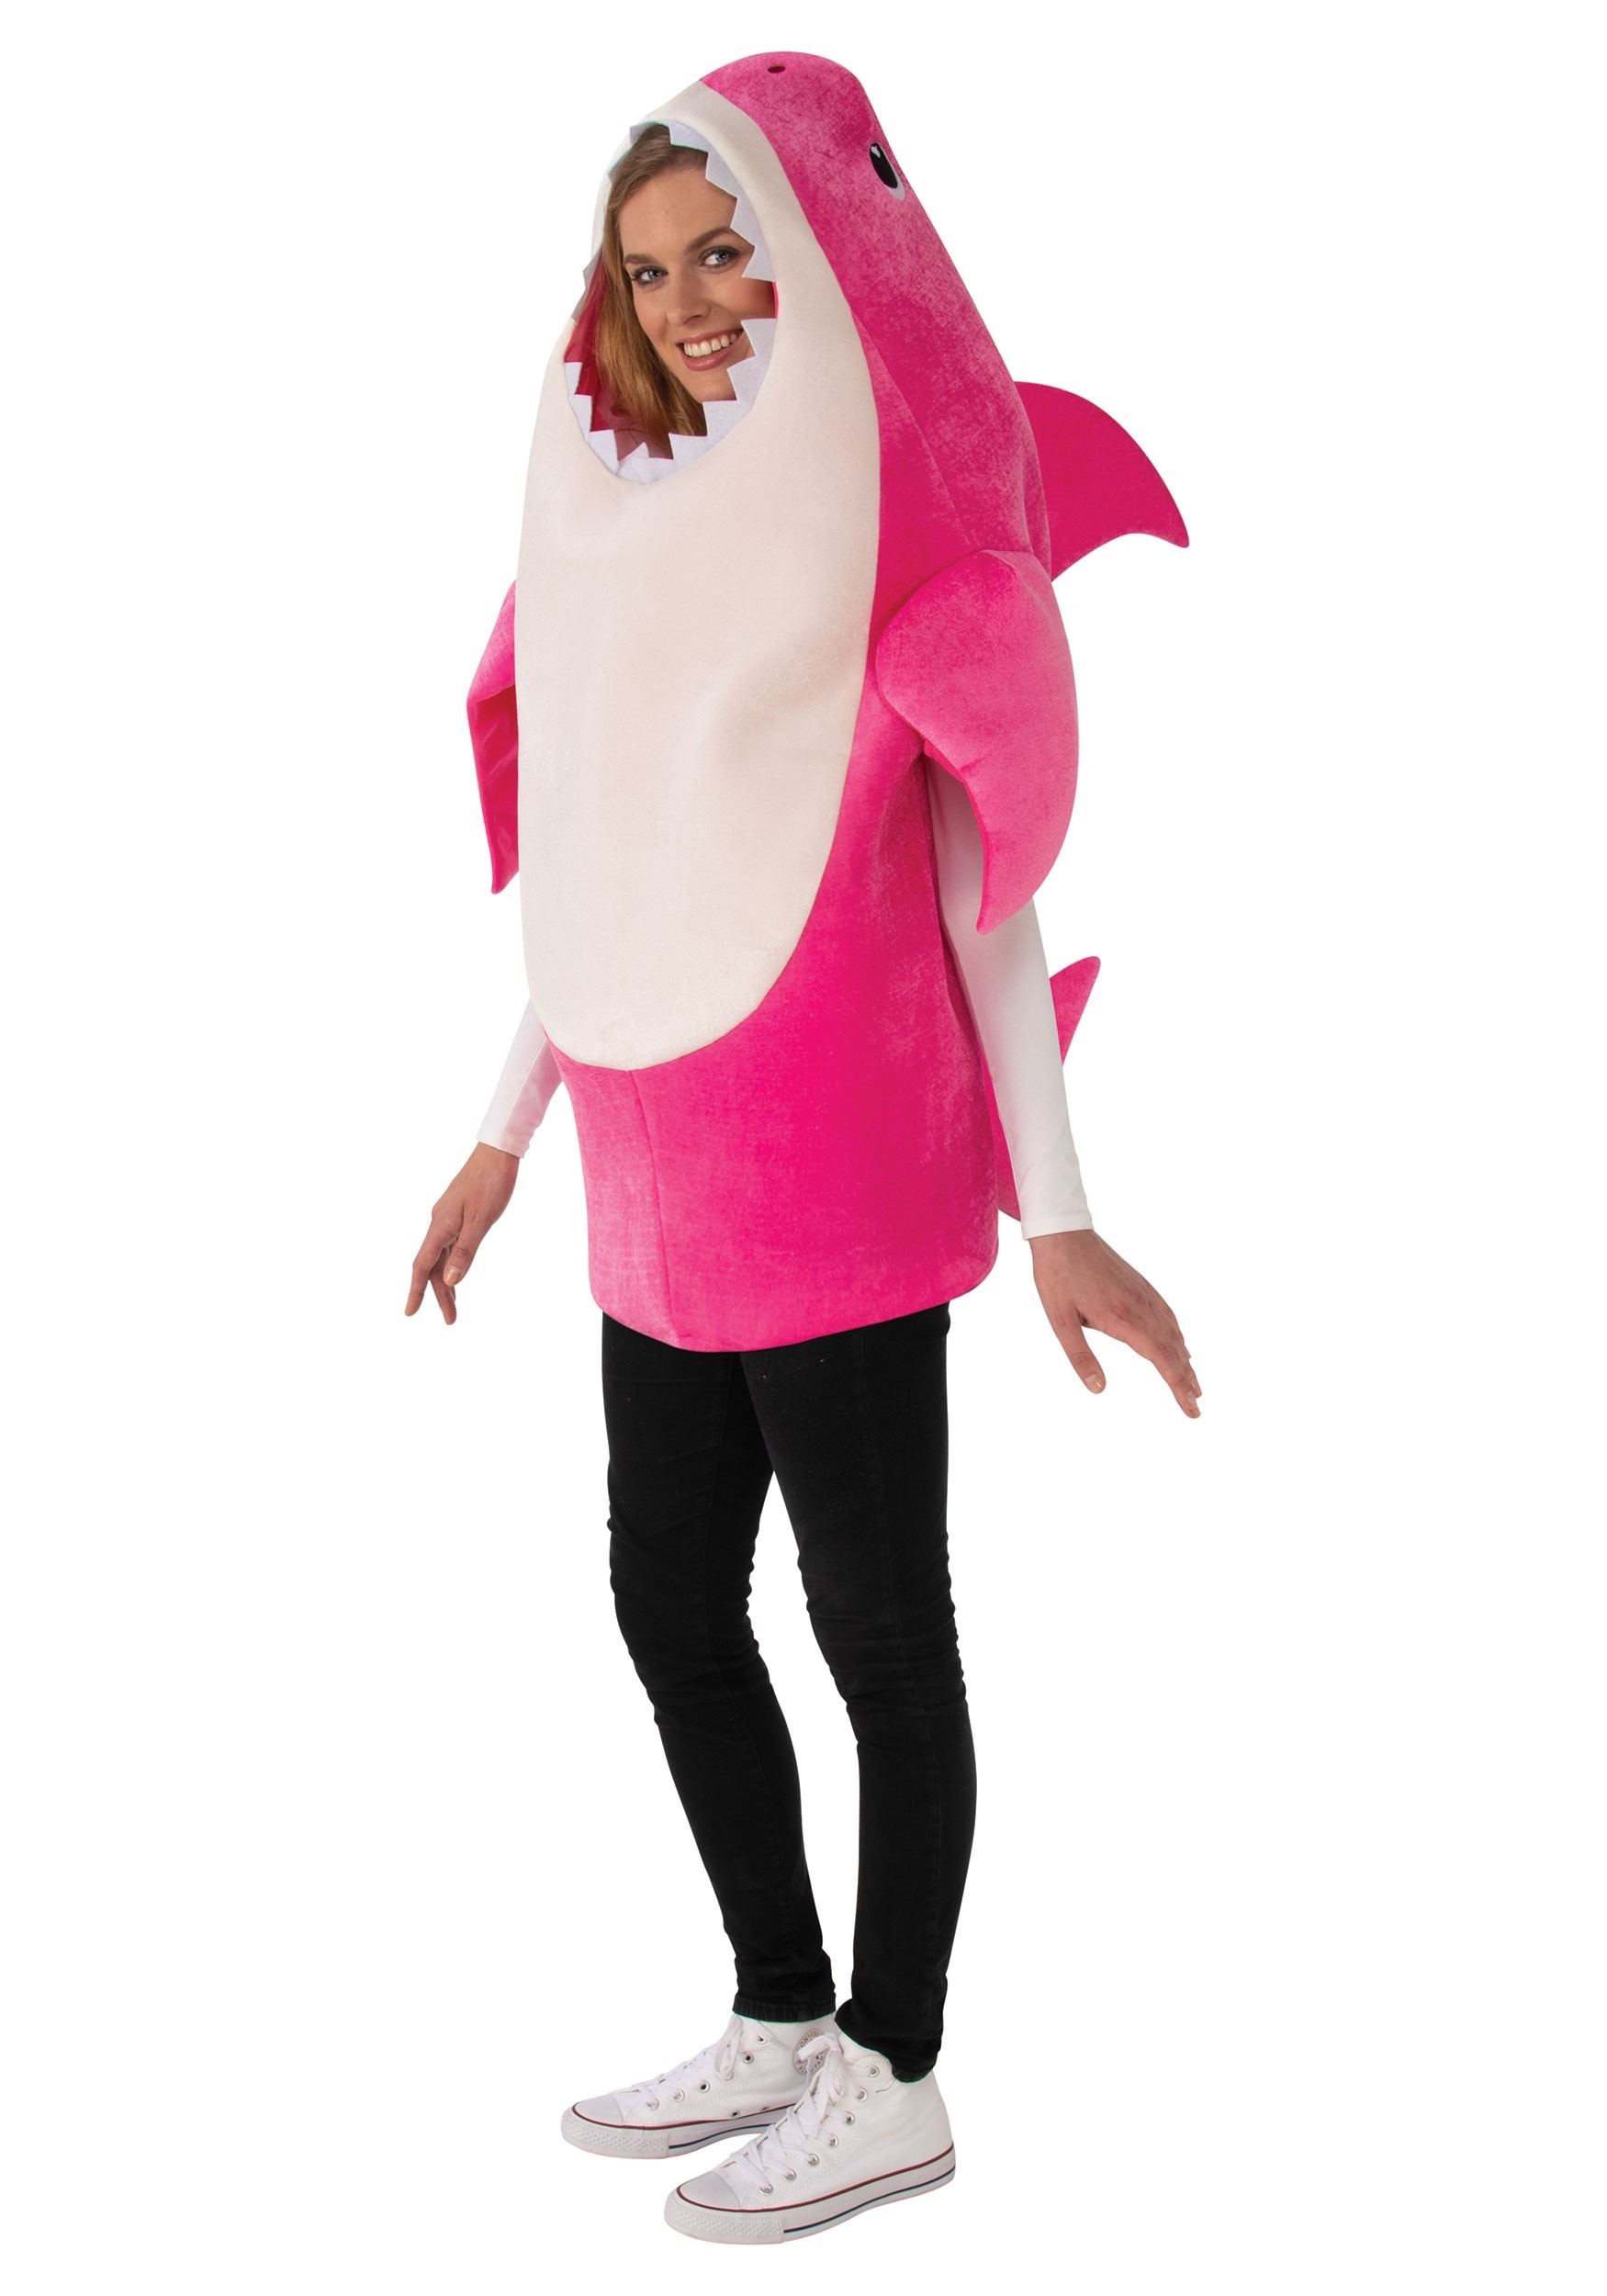 Baby Shark Mommy Shark Adult Costume with Sound Chip